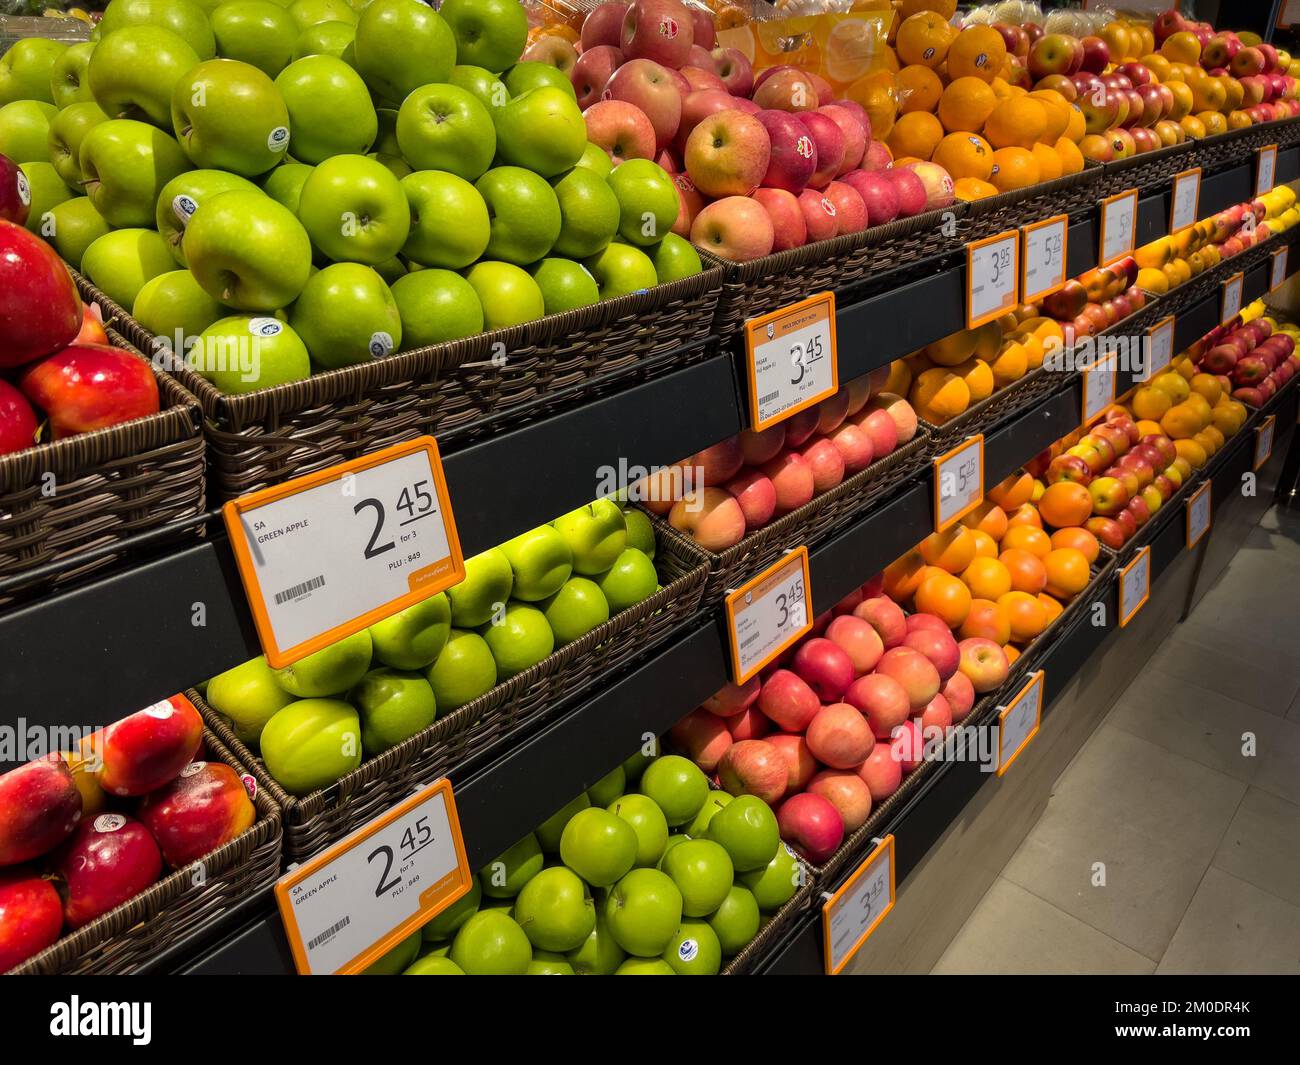 Diagonal angle of fresh fruits such as apples and oranges on the shelves for consumers to buy it in the supermarket. Stock Photo